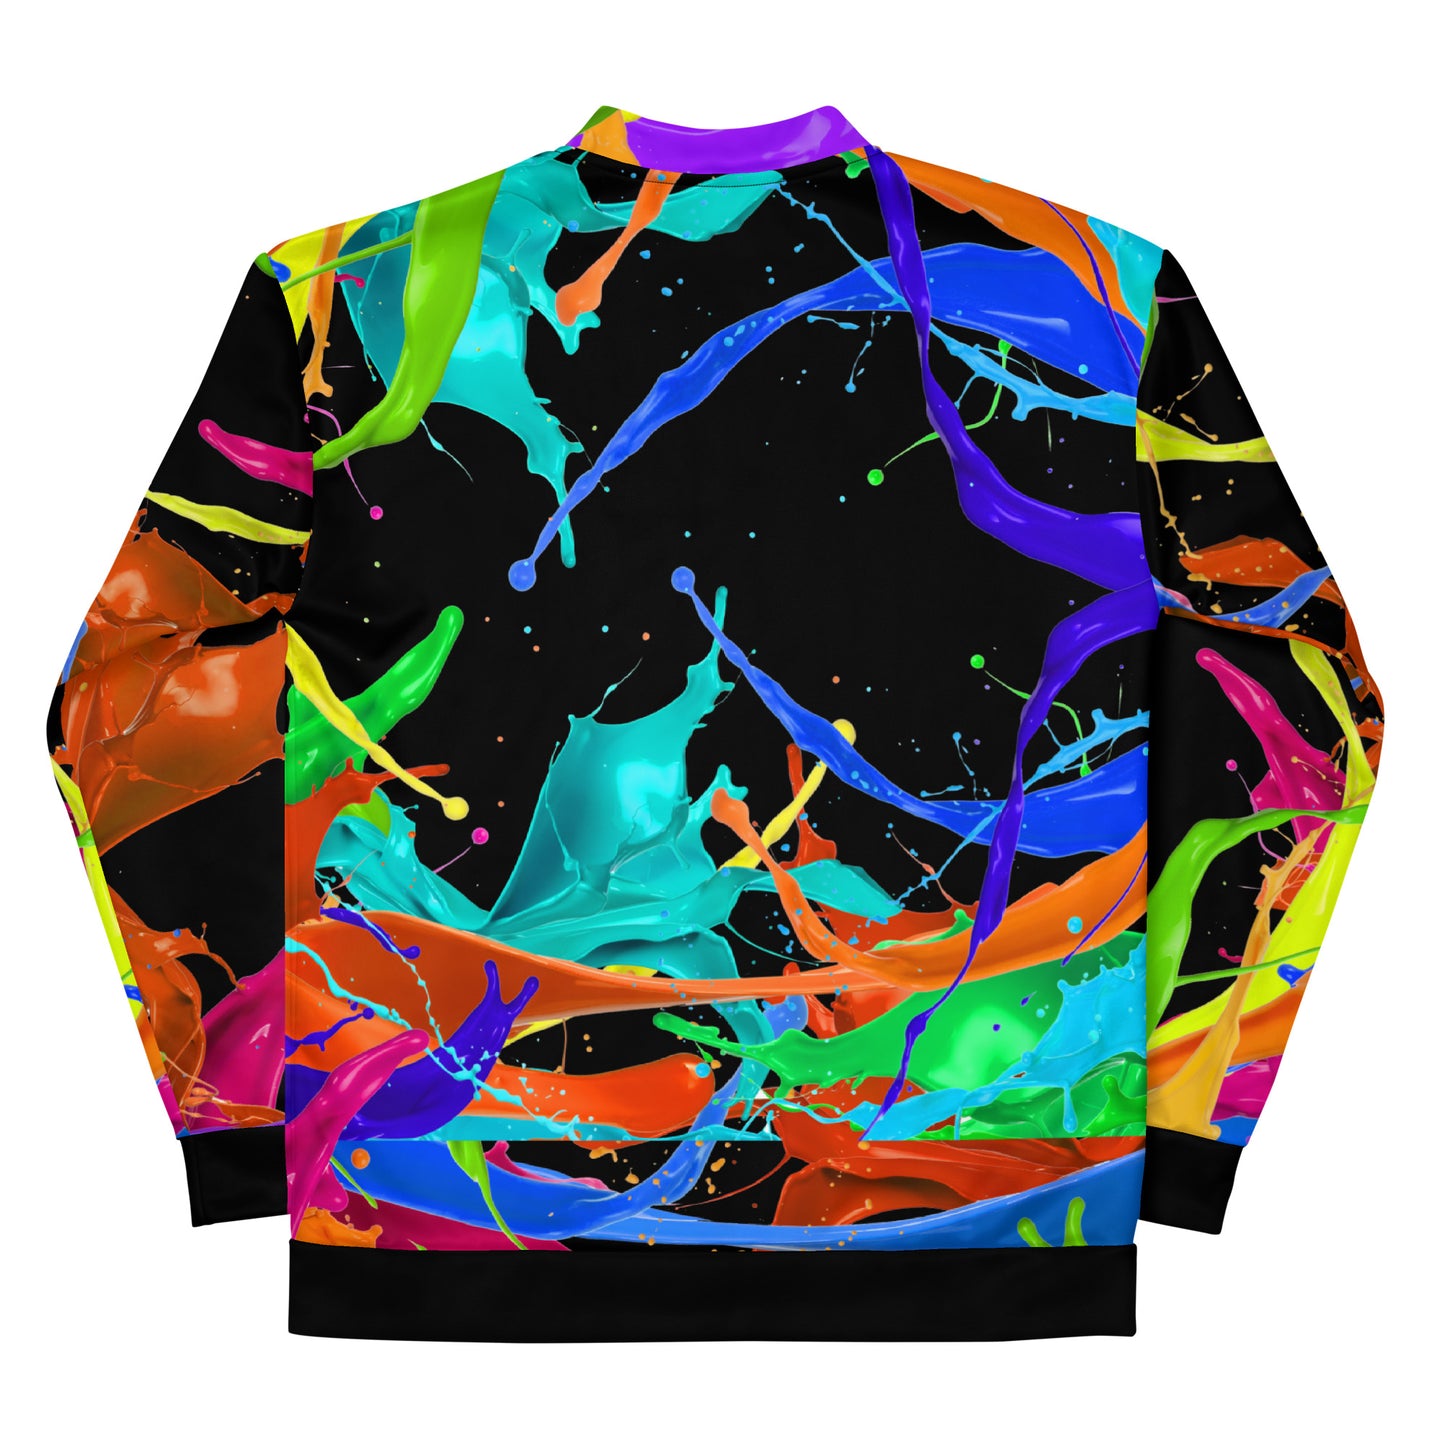 Modern ManChic Electric Splash Bomber Jacket - Refined Style with a Masculine  Men's